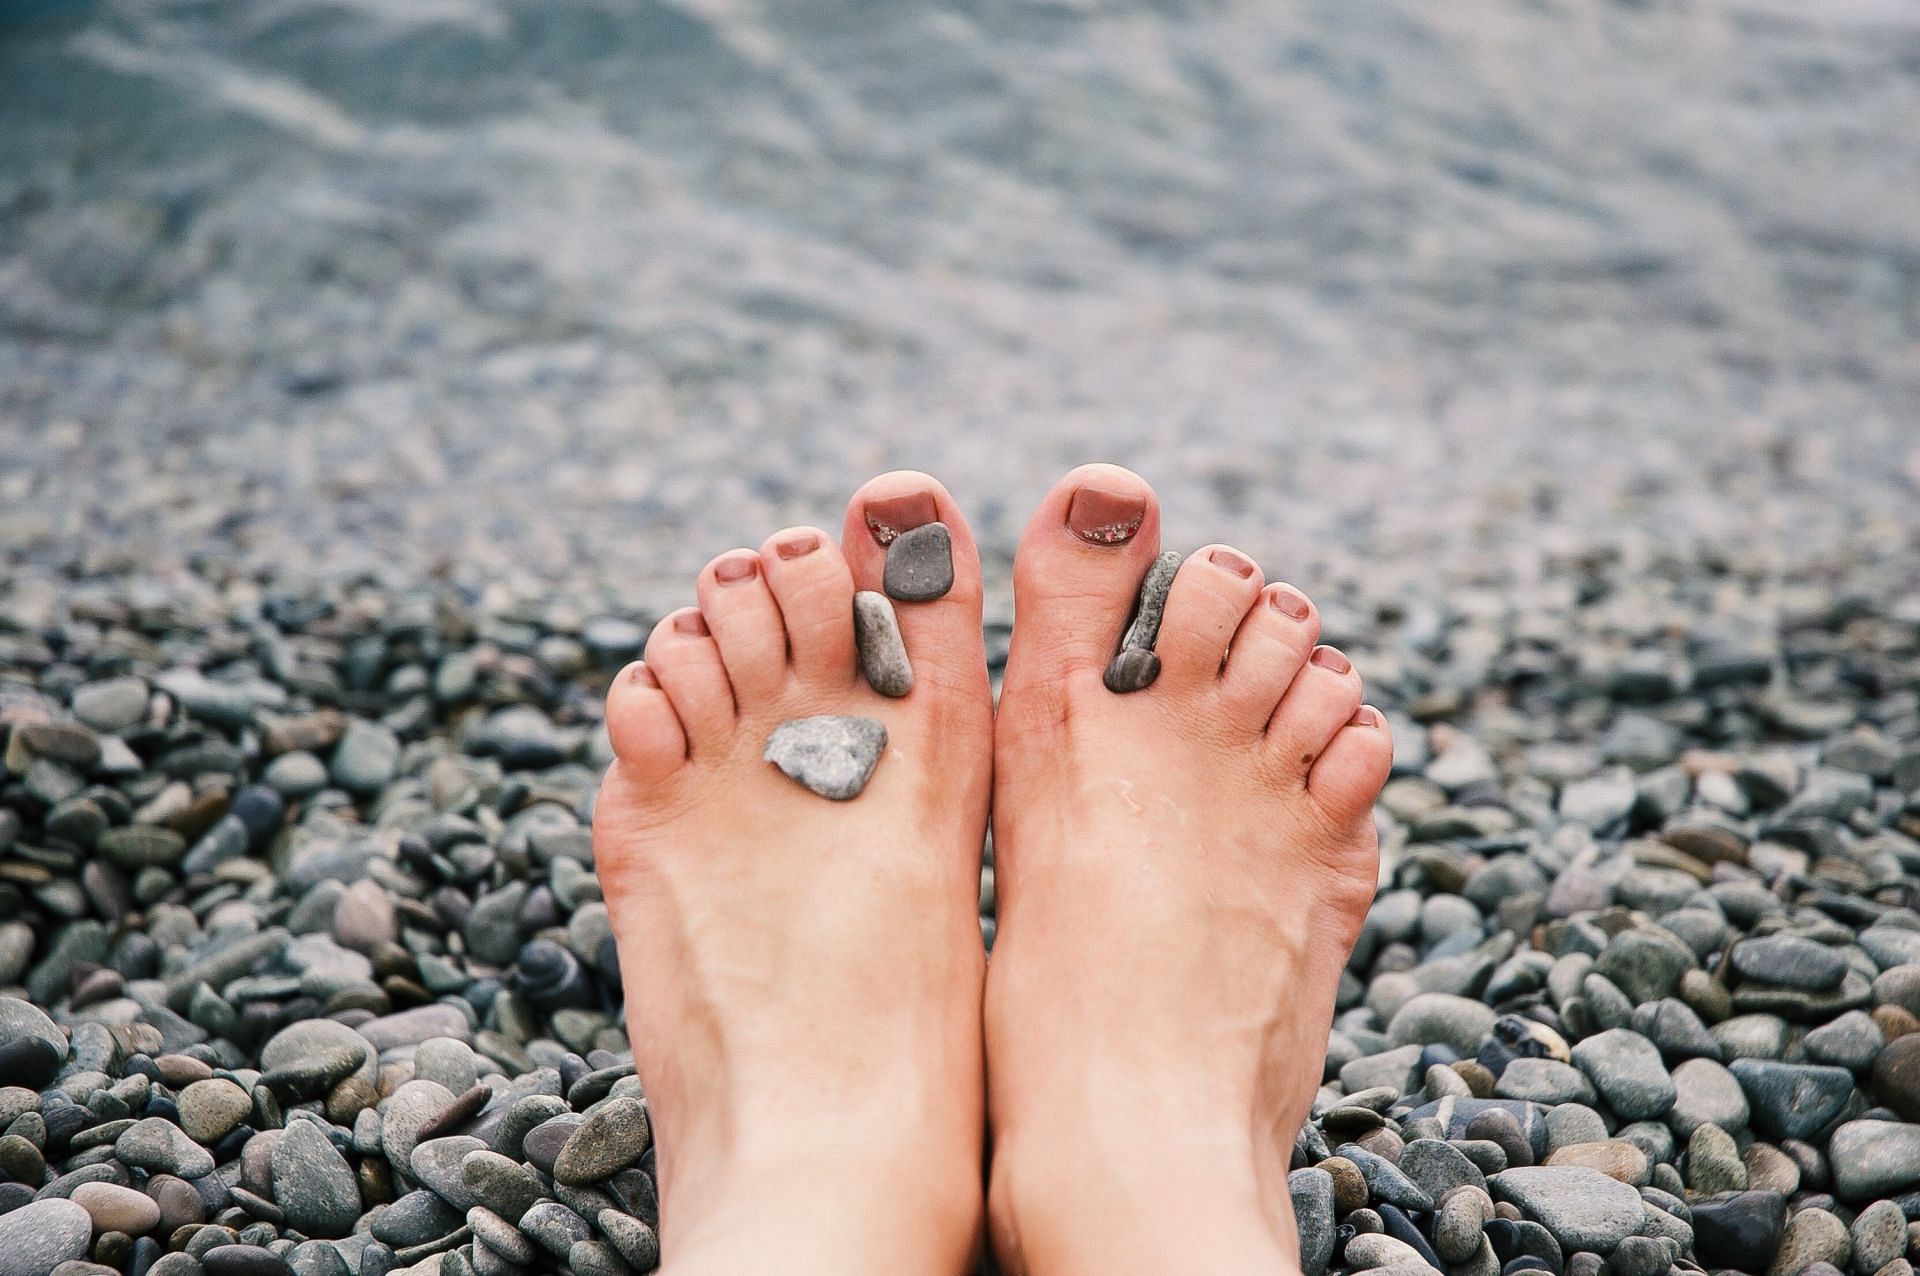 Swollen toes causes (image sourced via Pexels / Photo by evg)